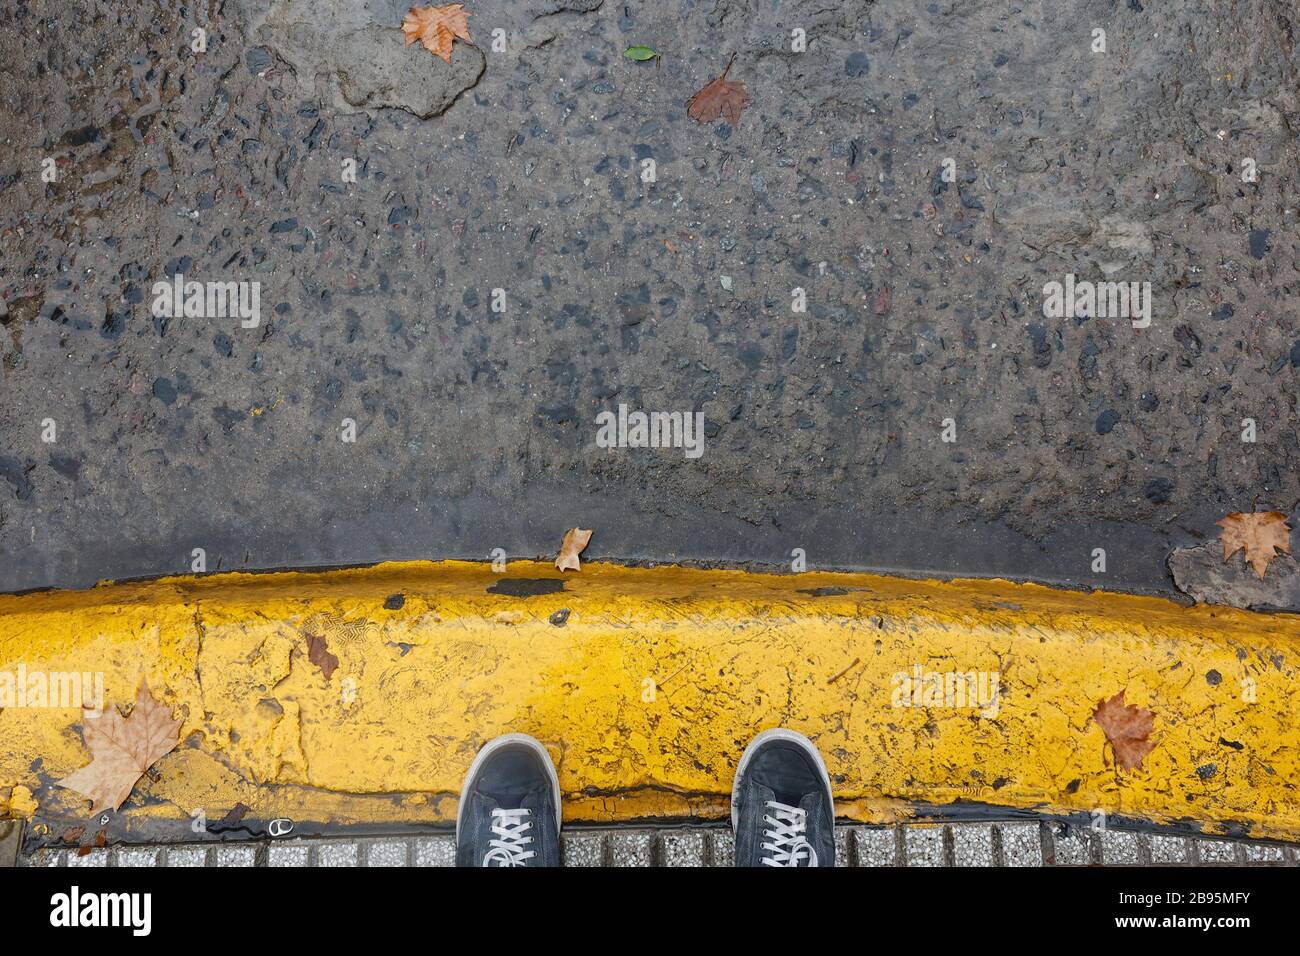 Feet on yellow painted sidewalk curb during a rainig day in Buenos Aires Stock Photo